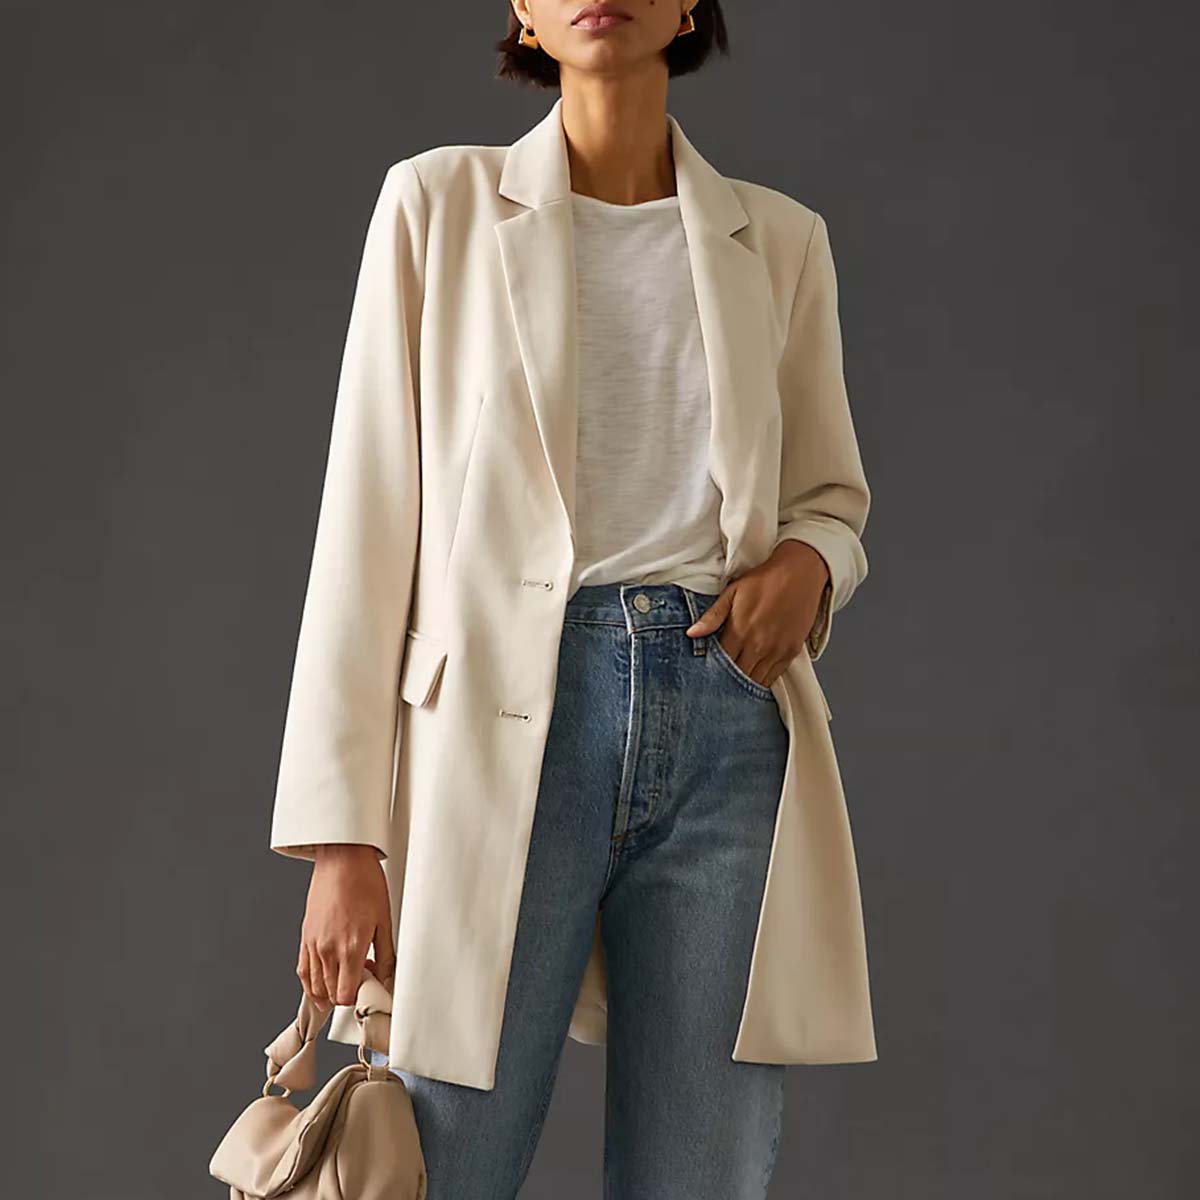 fall fashion staples anthropologie 302360 1663874980831 main.1200x1200uc - These 24 Wardrobe Staples Are Dominating Our Editors&#039; Fall Looks